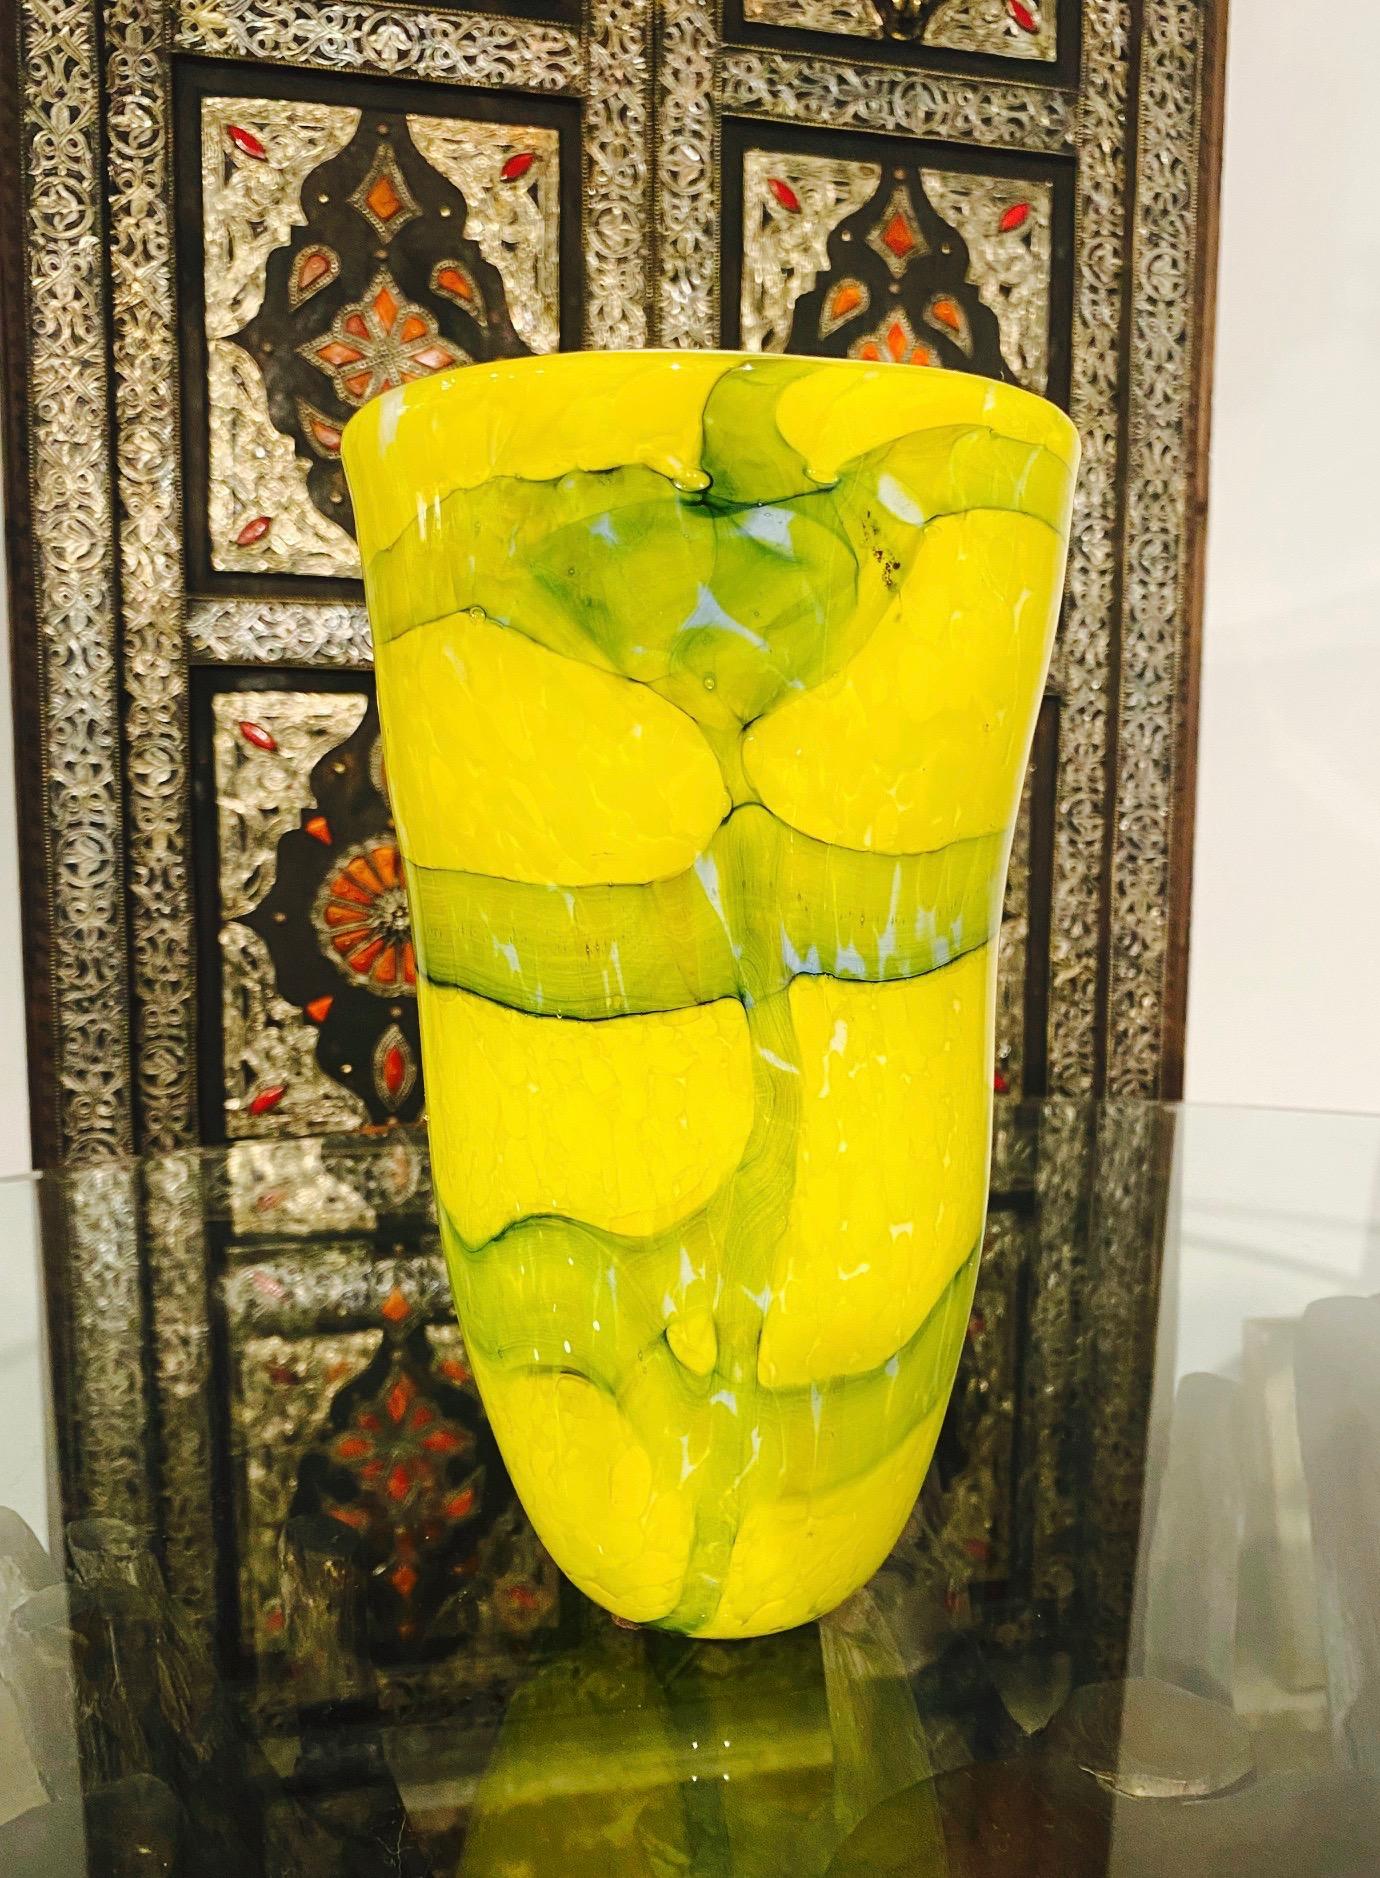 Abstract Murano Glass Vase by Fratelli Toso in Yellow and Green, c. 1980 For Sale 6